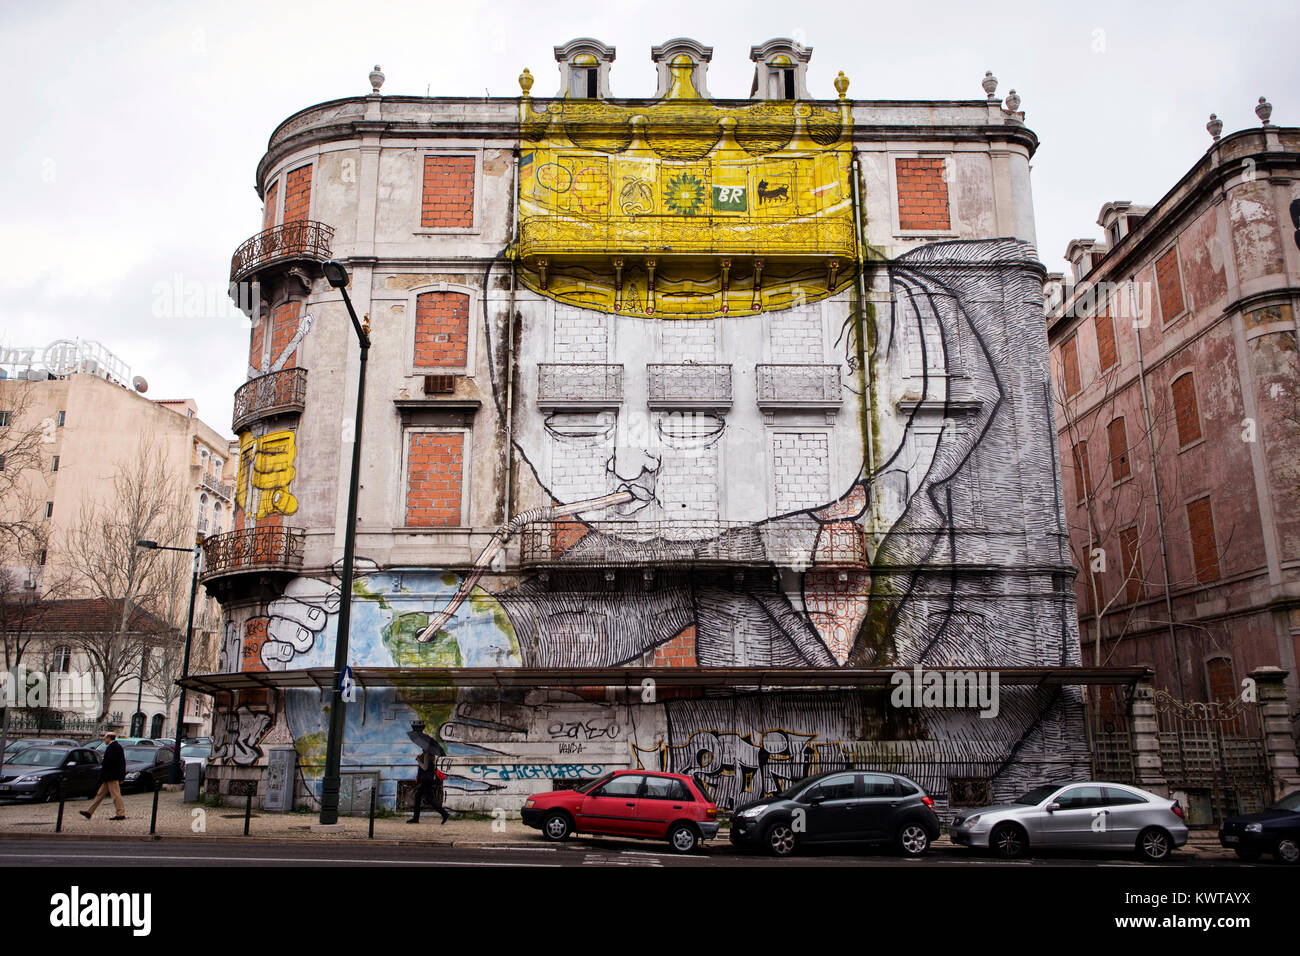 A gigantic spooky man with a golden crown painted by street art artist BLU at a corner building at Av Fontes Pereira de Melo in Lisbon. Portugal 2013. Stock Photo